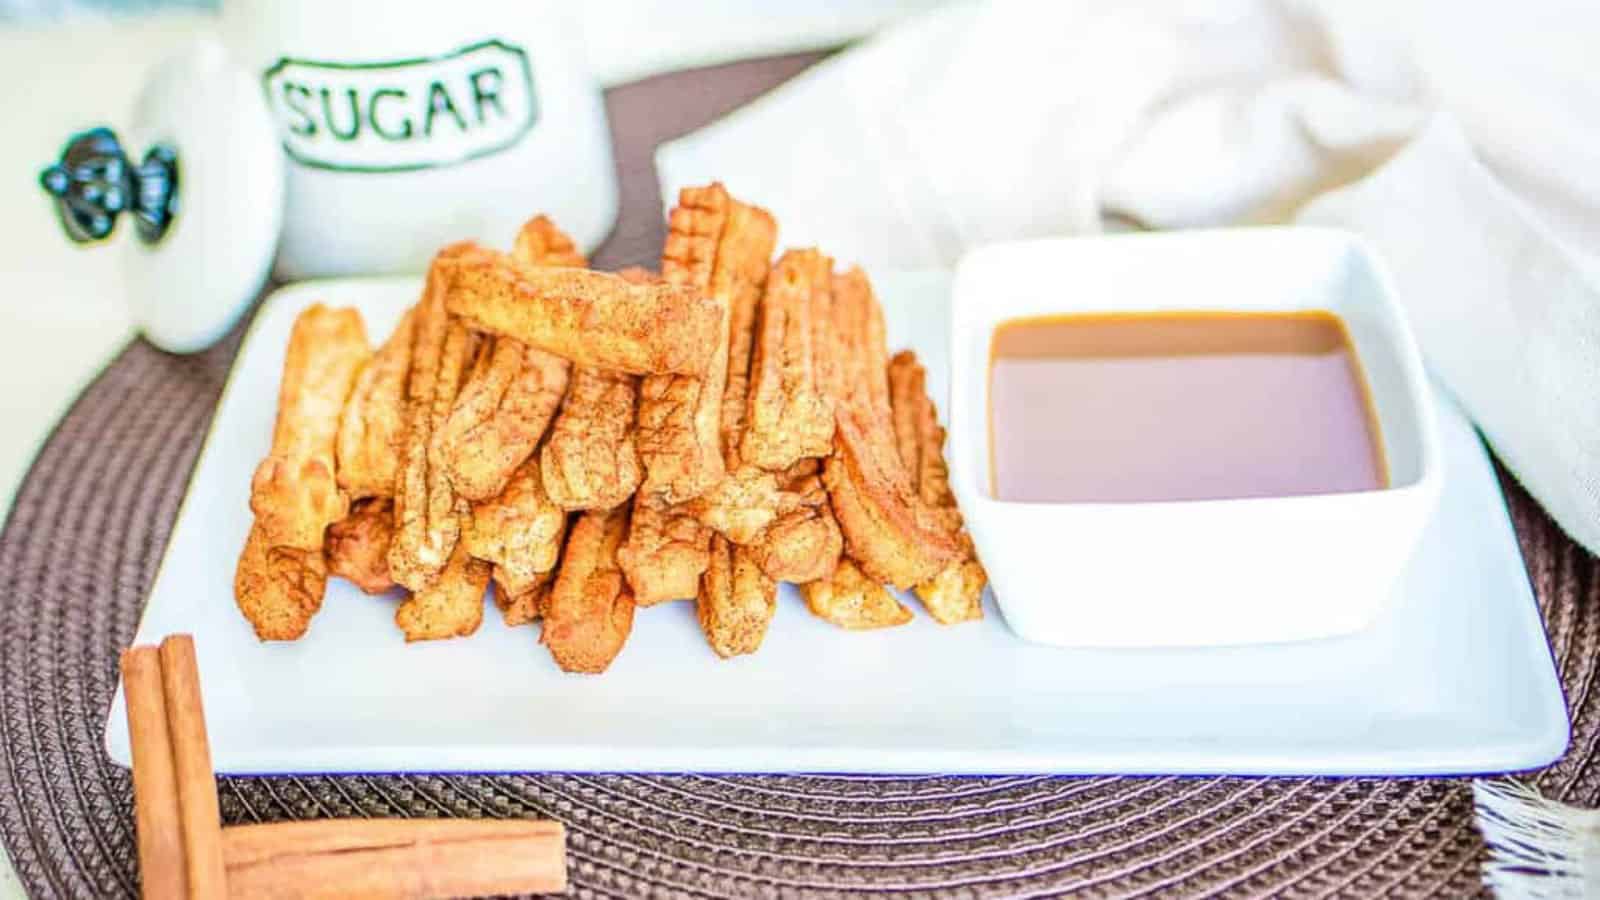 Churros on a white plate with a bowl of caramel dipping sauce on the side.